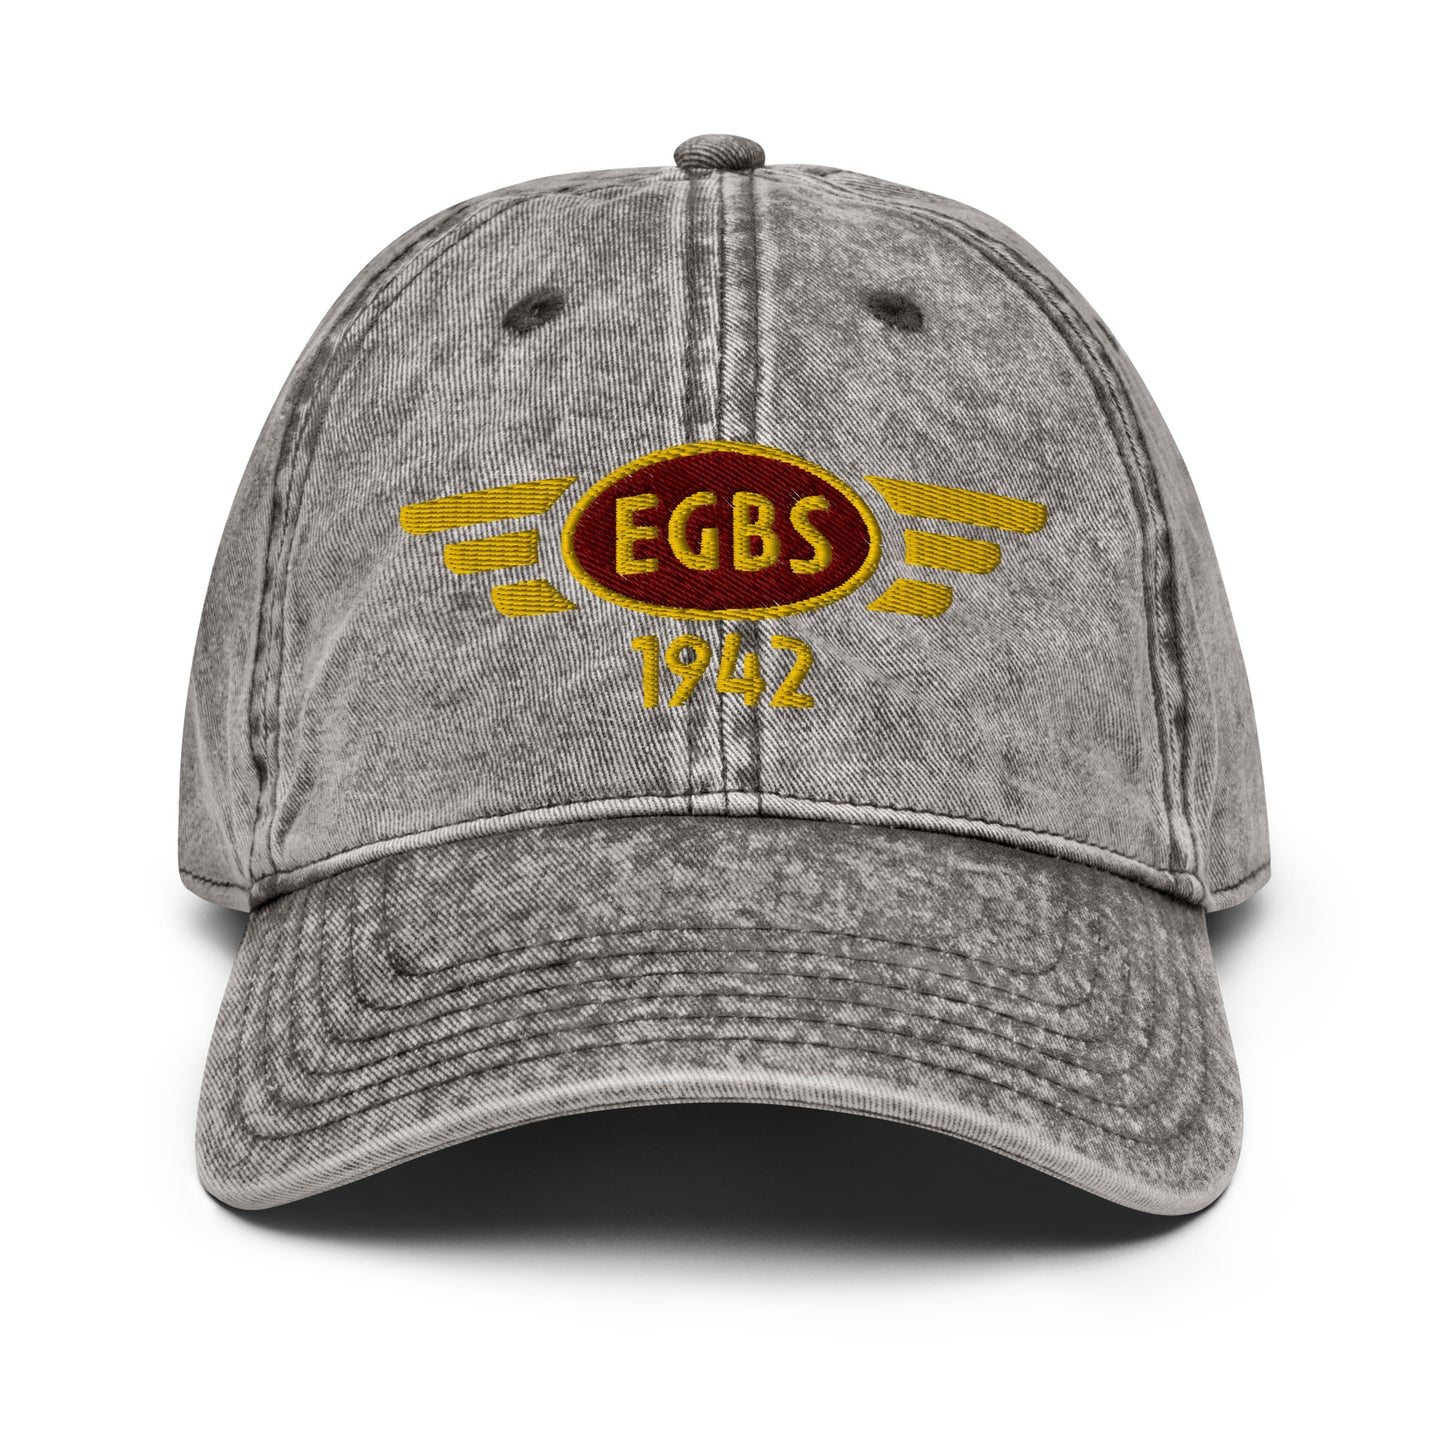 Charcoal gray coloured cotton twill baseball cap with embroidered vintage style aviation logo for Shobdon Aerodrome.